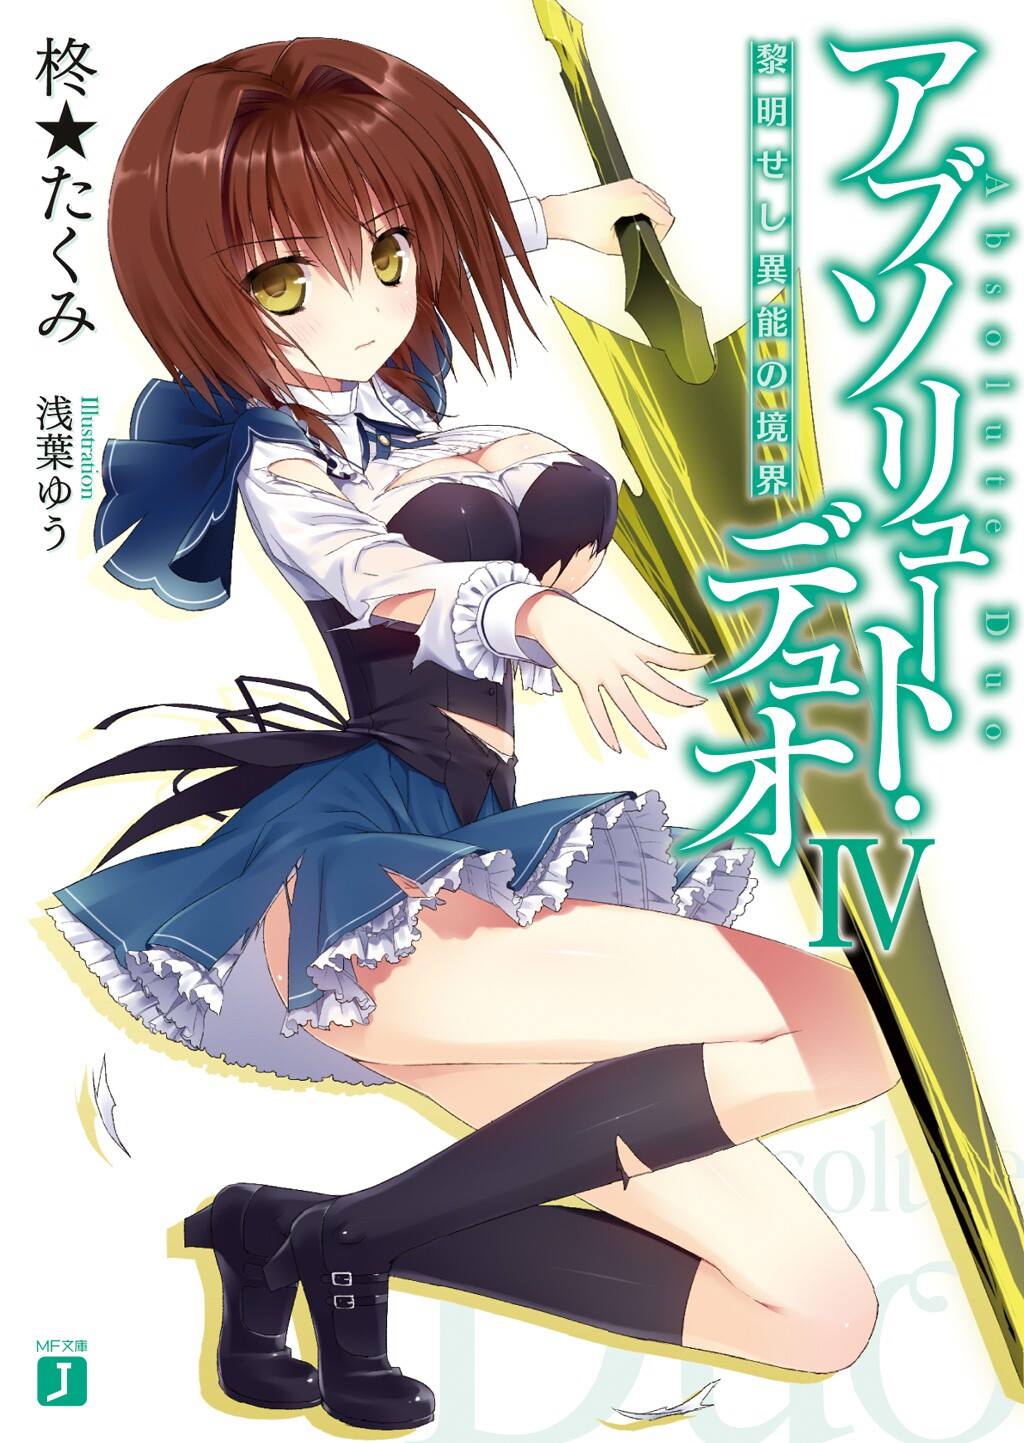 Absolute Duo Volumes, Absolute Duo Wiki